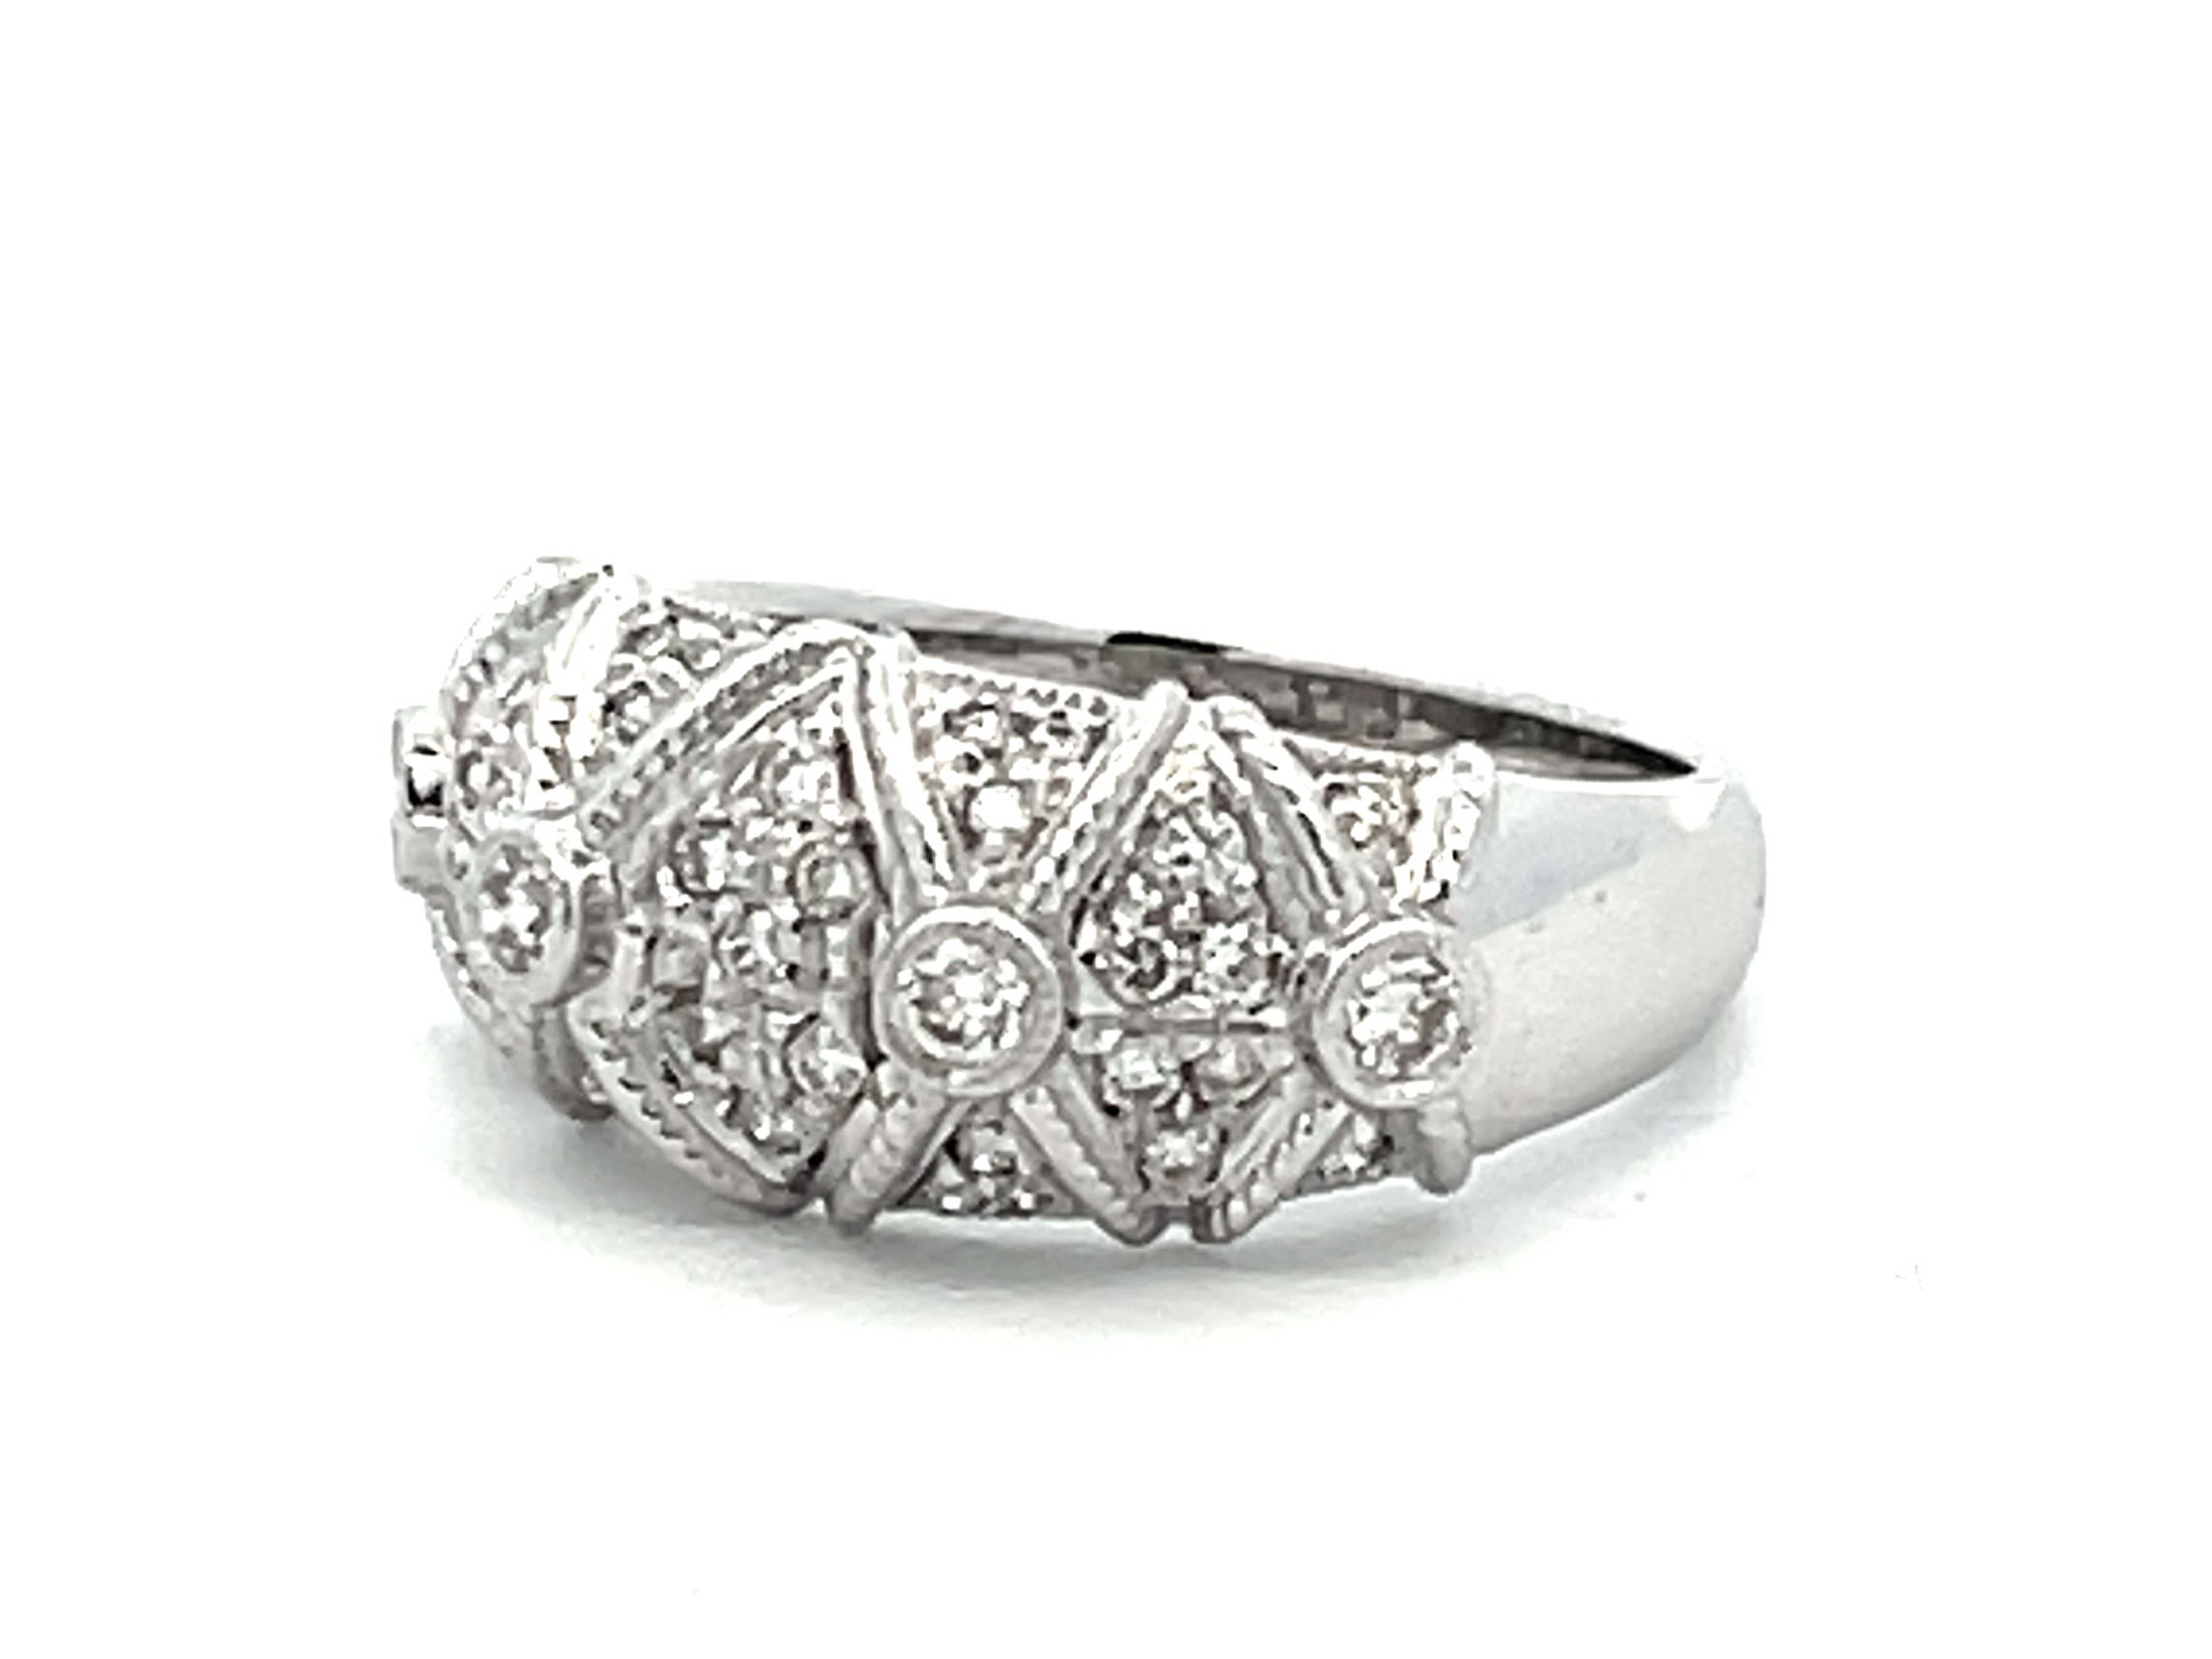 Diamond Geometric Dome Ring in 14k White Gold In Excellent Condition For Sale In Honolulu, HI